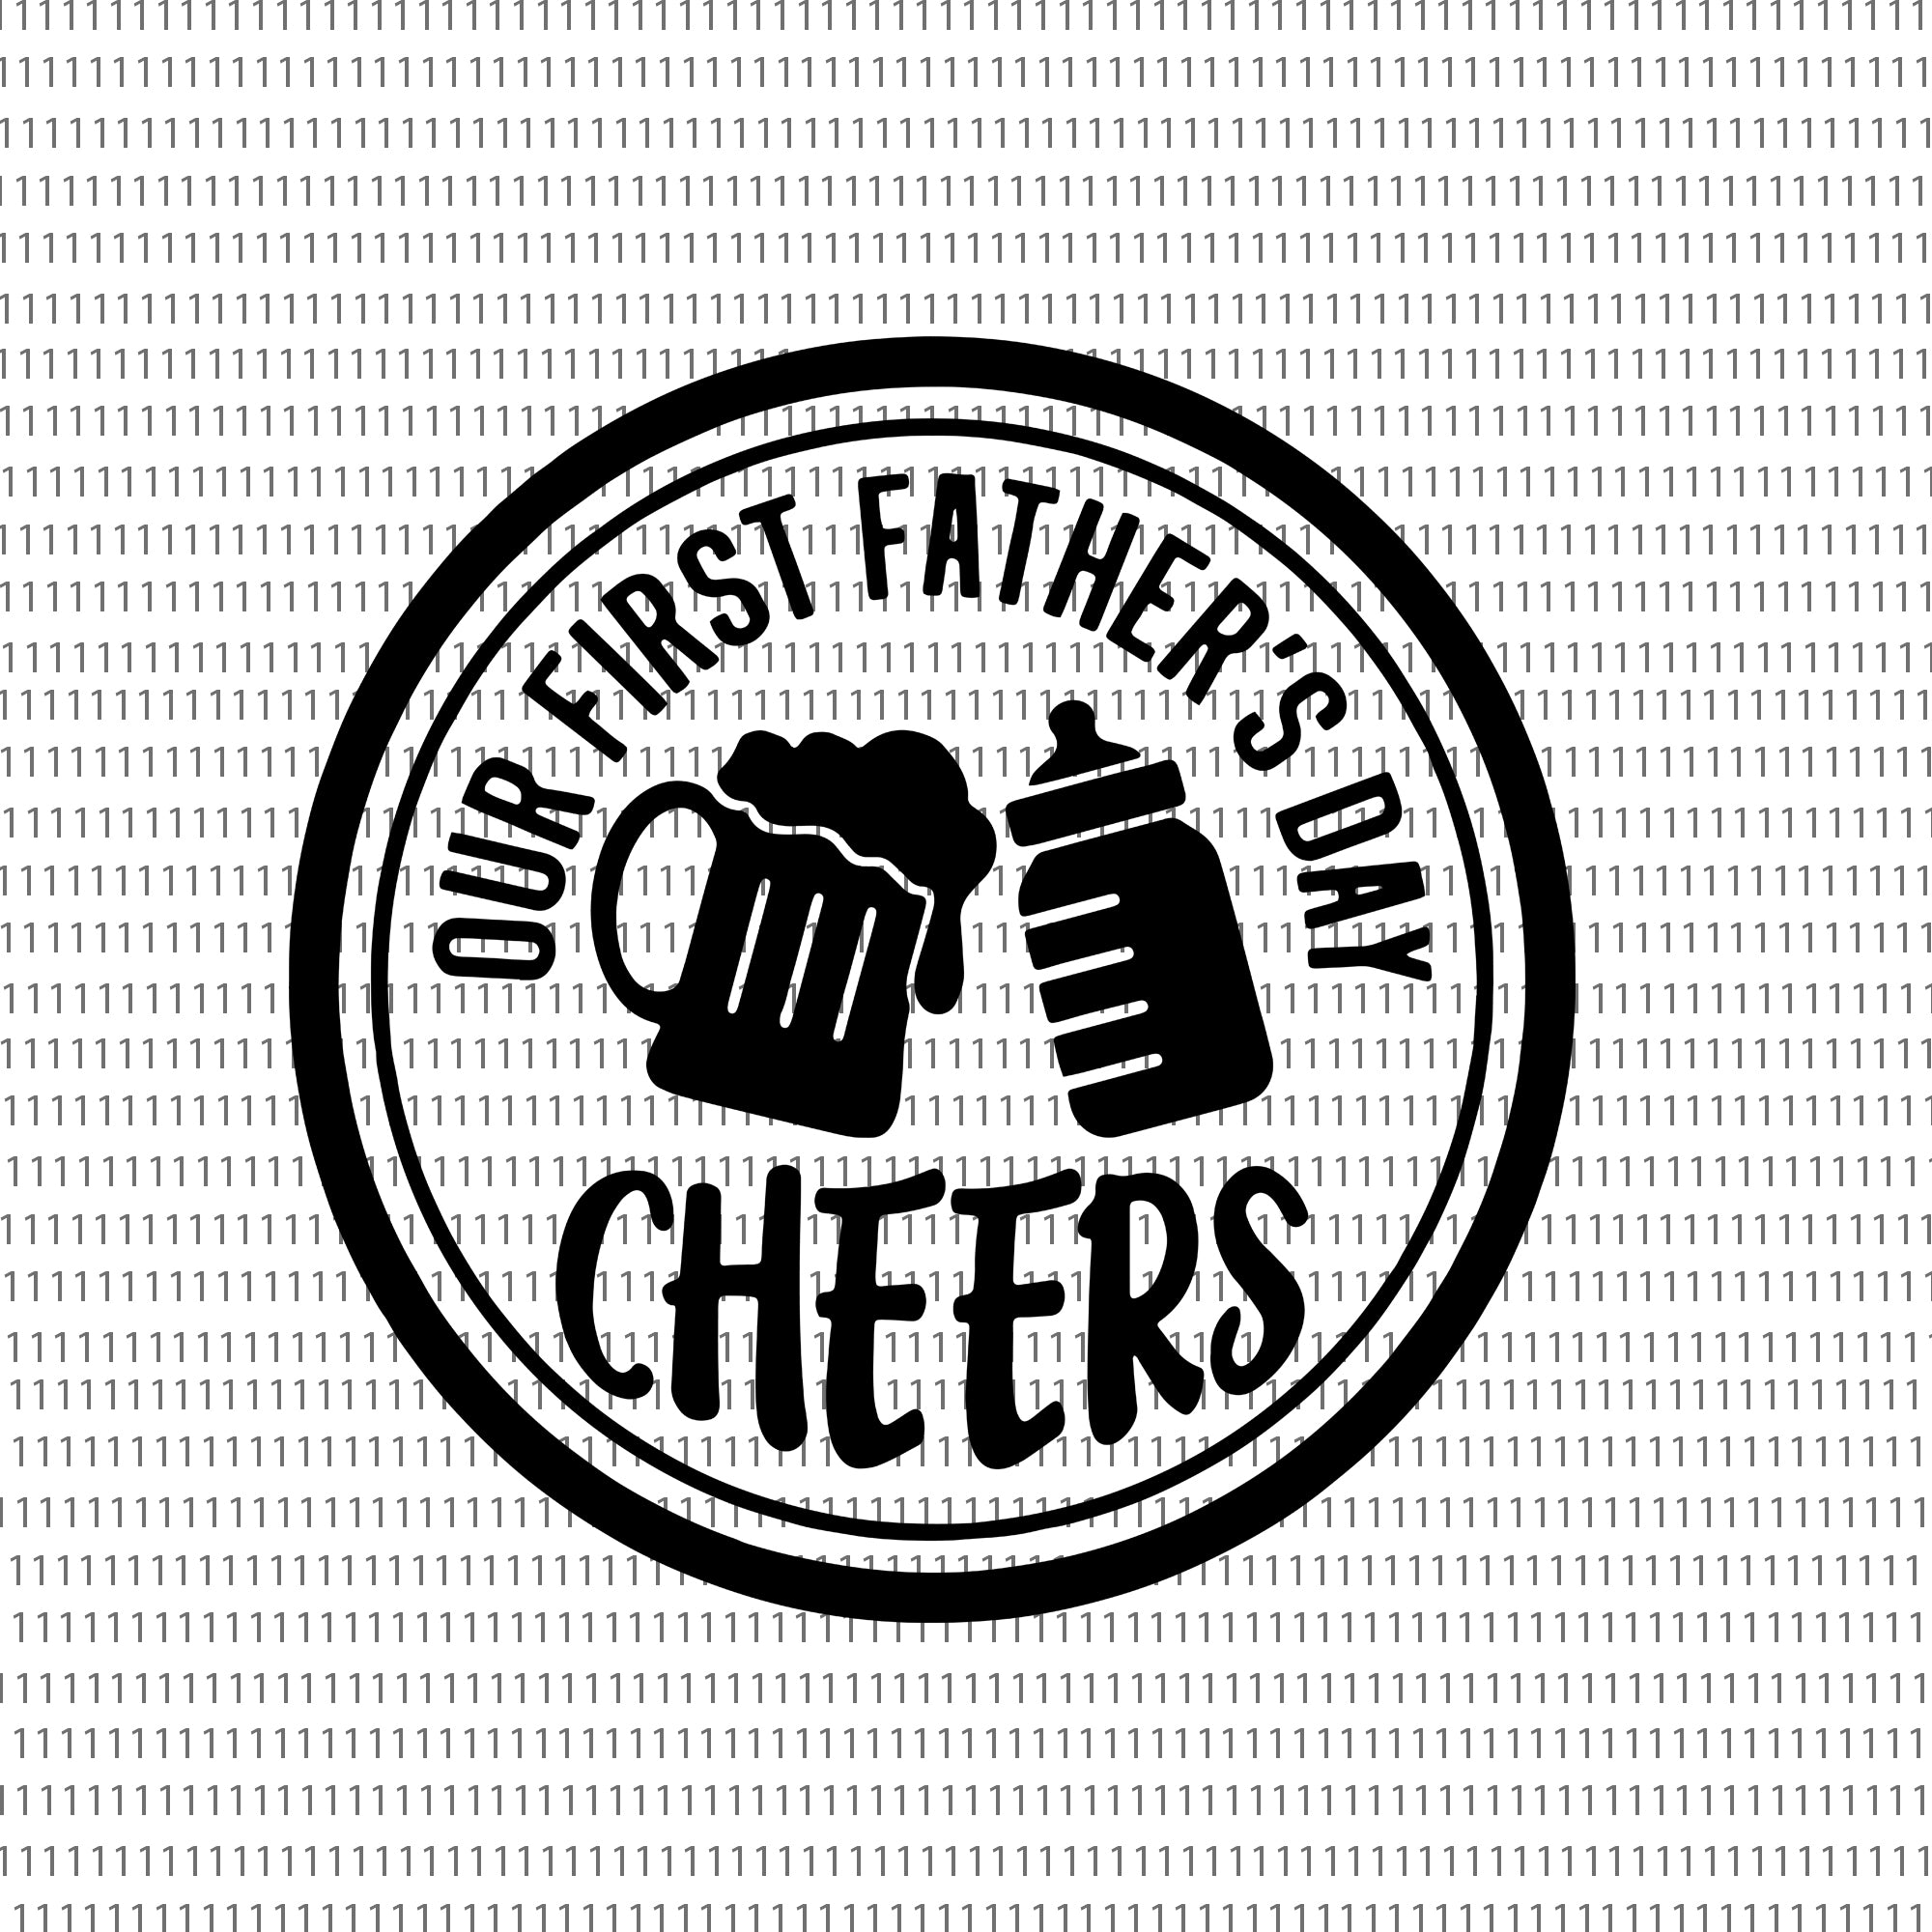 Our first father's day cheers svg, Our first father's day cheers, Our first father's day cheers png, father day svg, father day png, father day, father svg, daddy svg, dad